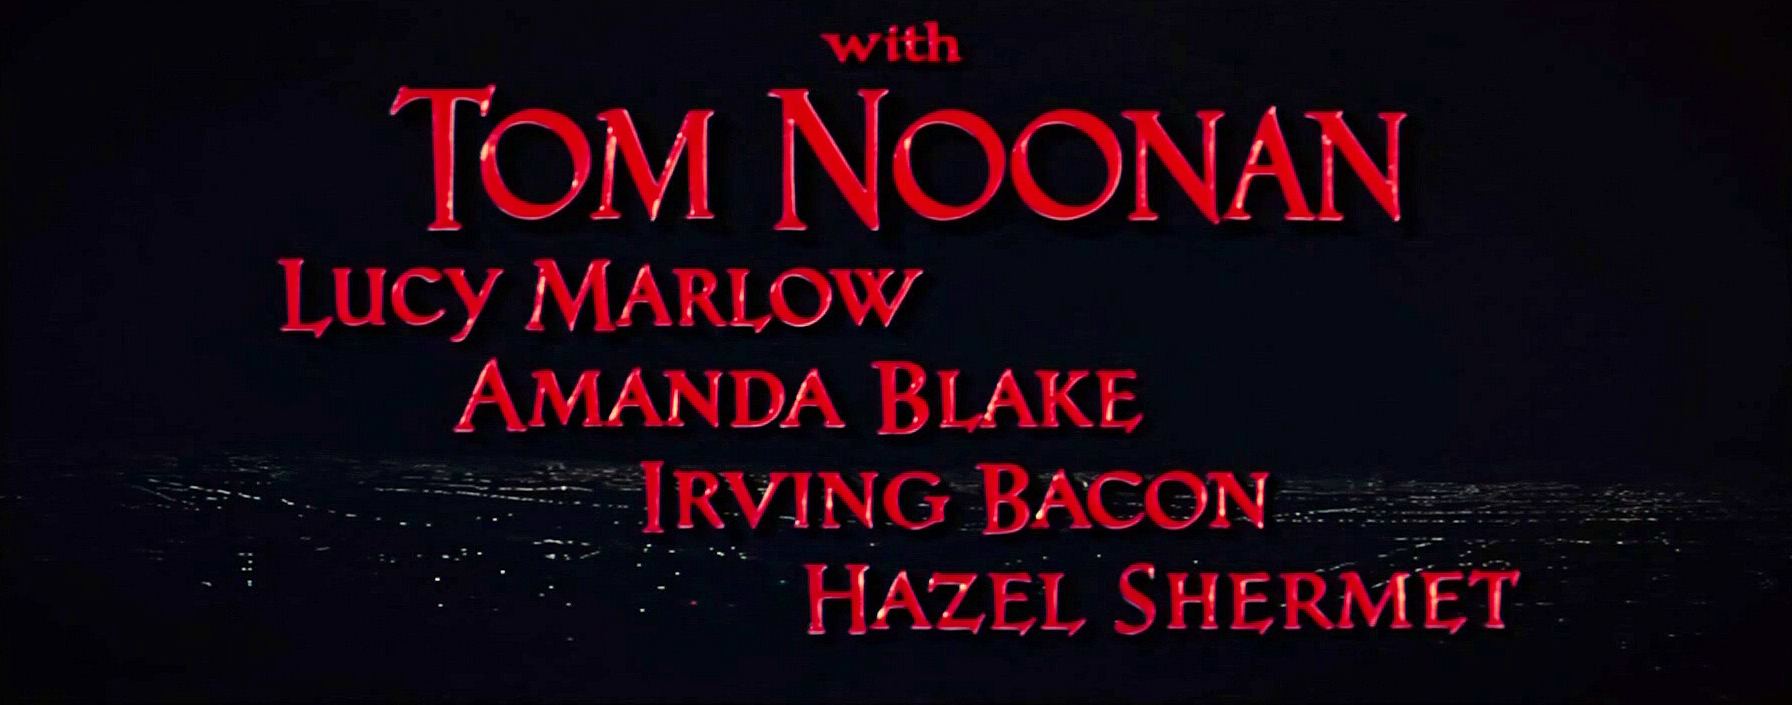 Main title from A Star Is Born (1954) (7). With Tom Noonan, Lucy Marlow, Amanda Blake, Irving Bacon, Hazel Shermet